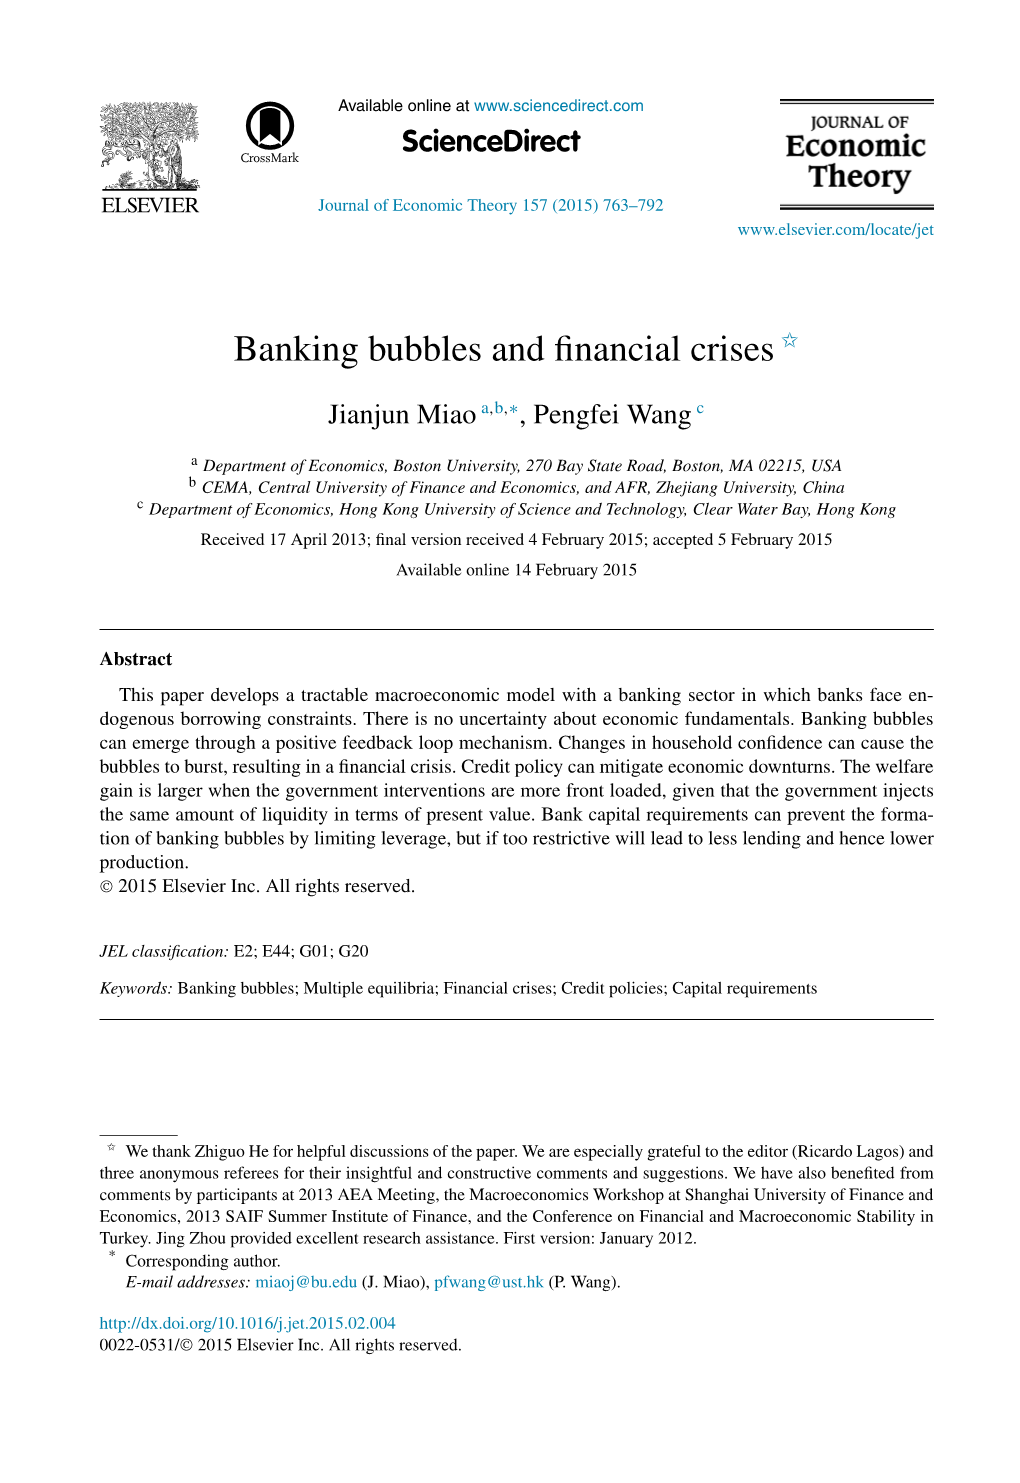 Banking Bubbles and Financial Crises